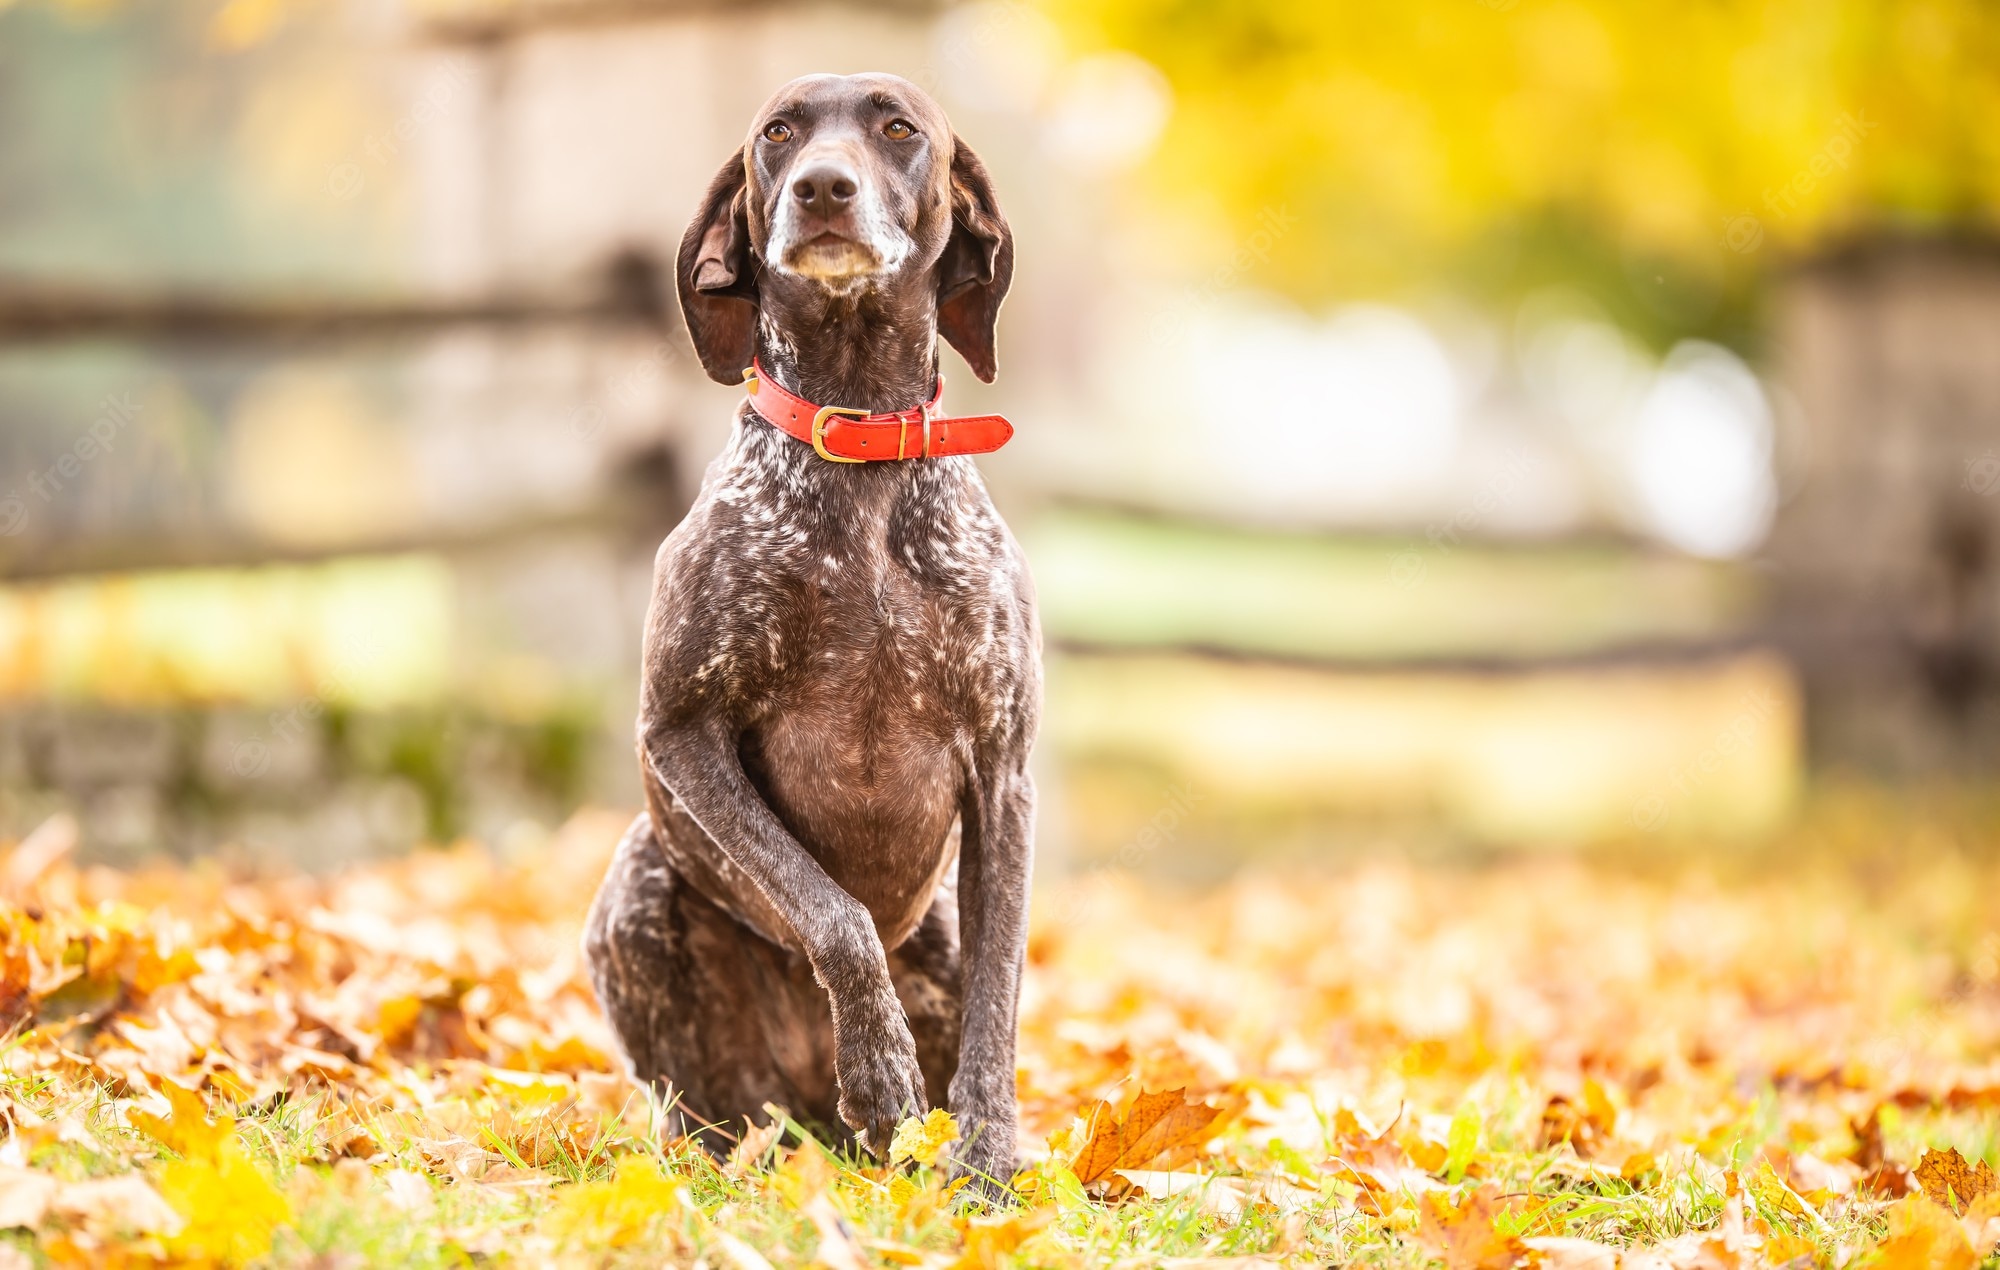 German Shorthaired Pointer Puppy Image. Free Vectors, & PSD